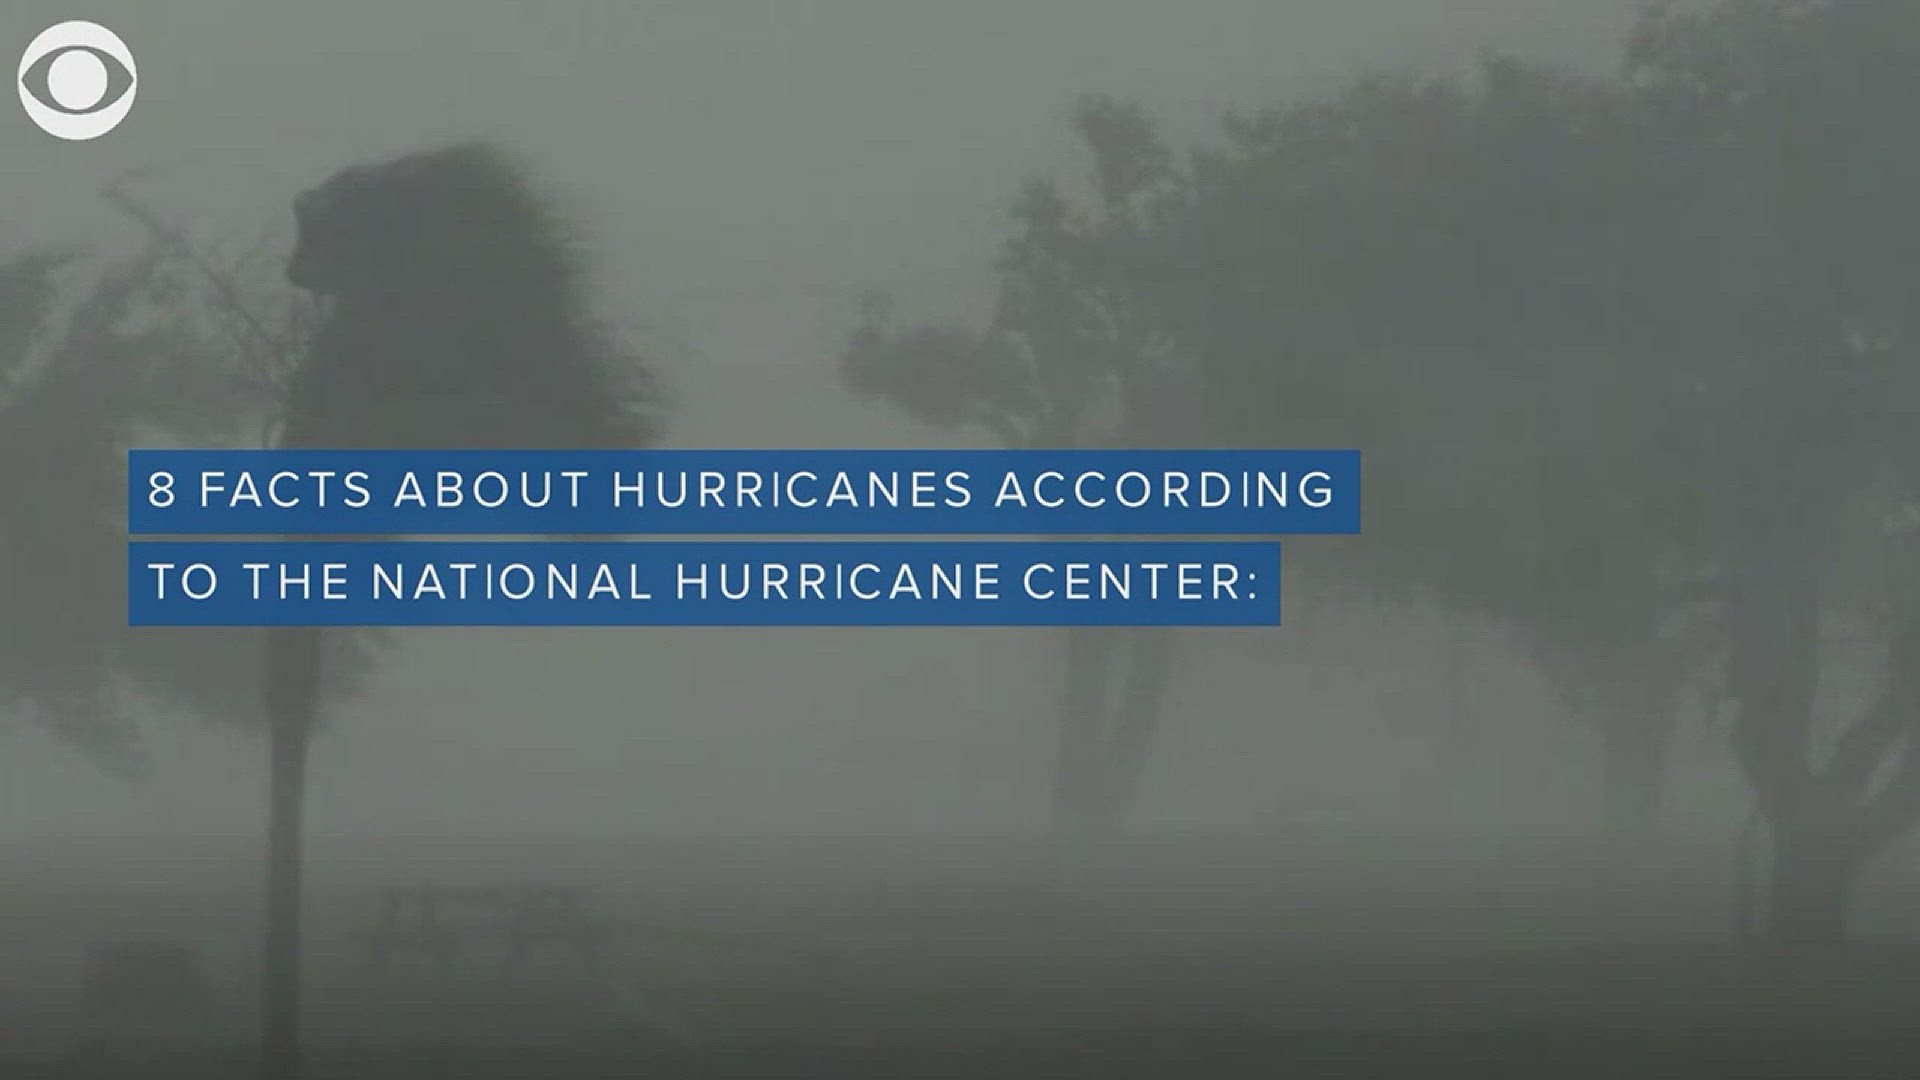 Facts From the National Hurricane Center